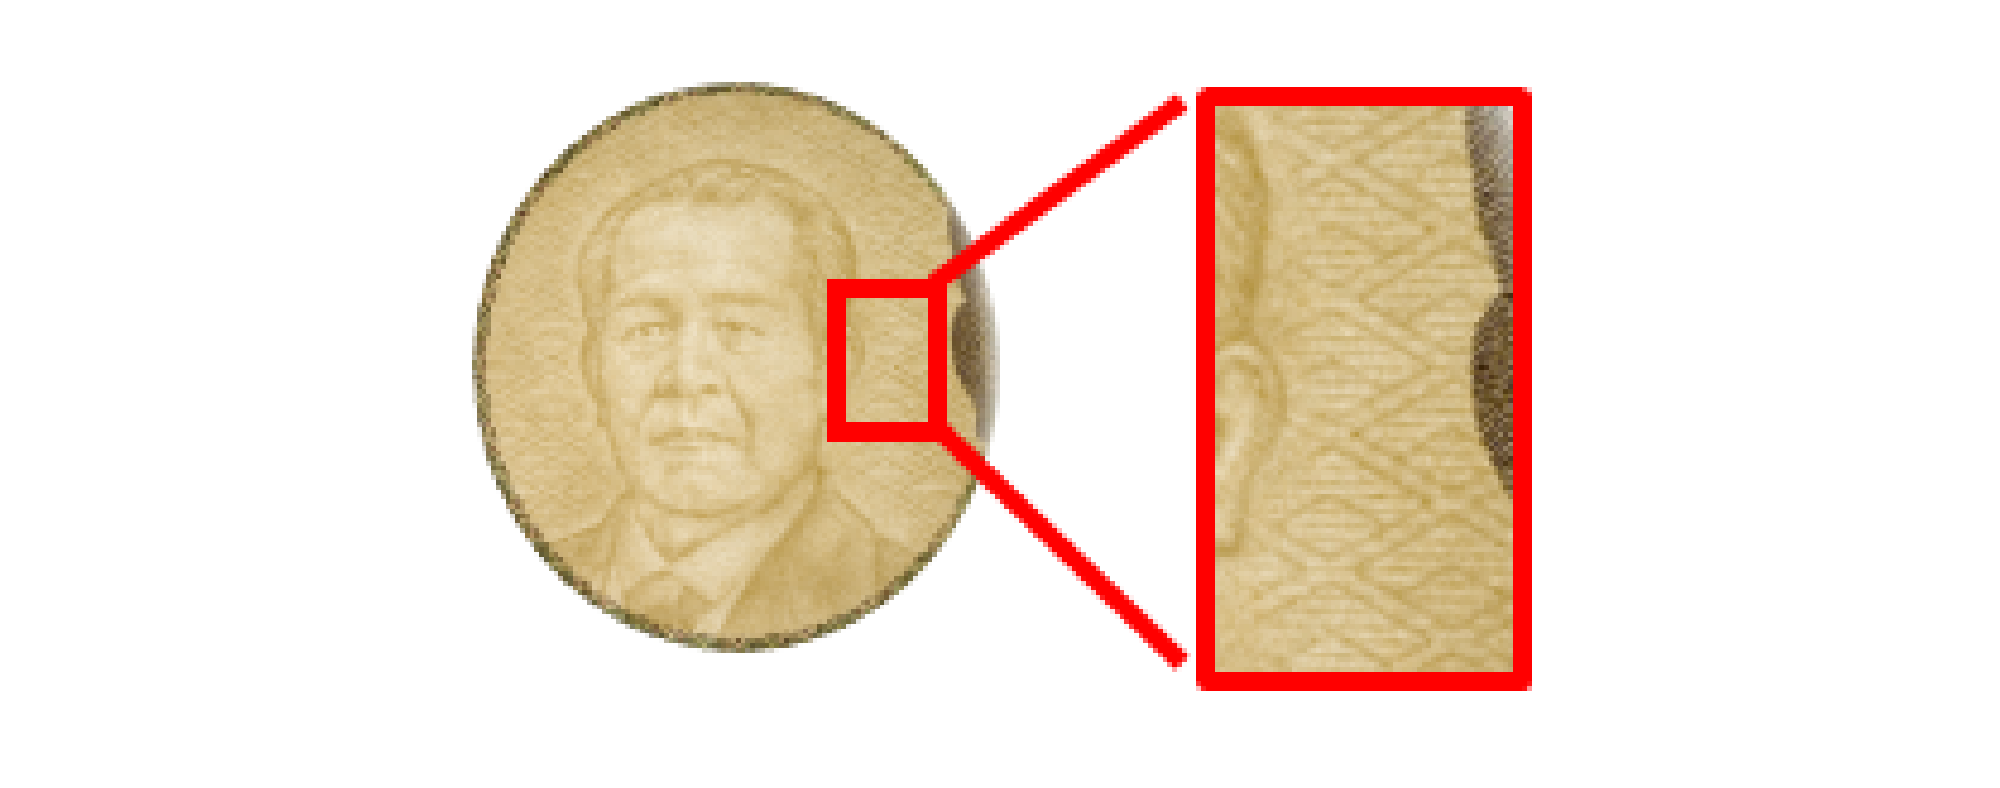 Image of SHIBUSAWA Eiichi's portrait watermark on the 10,000 yen note, and an enlarged image of the high-definition rhombus-pattern watermark that is added to the background of the portrait watermark.